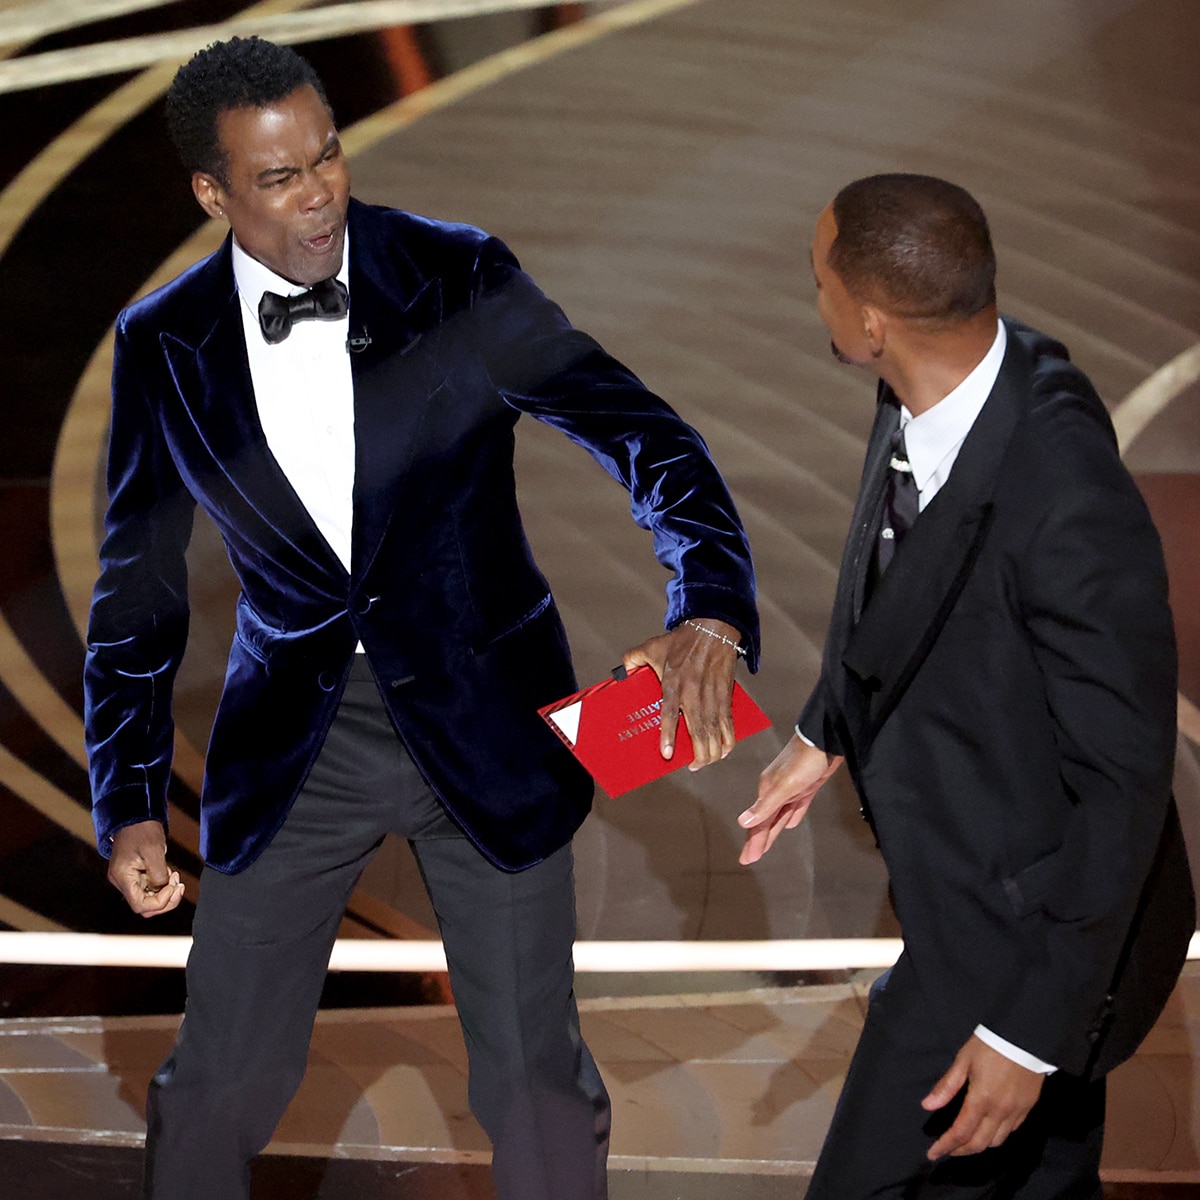 Oscar Officials Confirm Will Smith and Chris Rock’s Altercation Wasn’t Planned